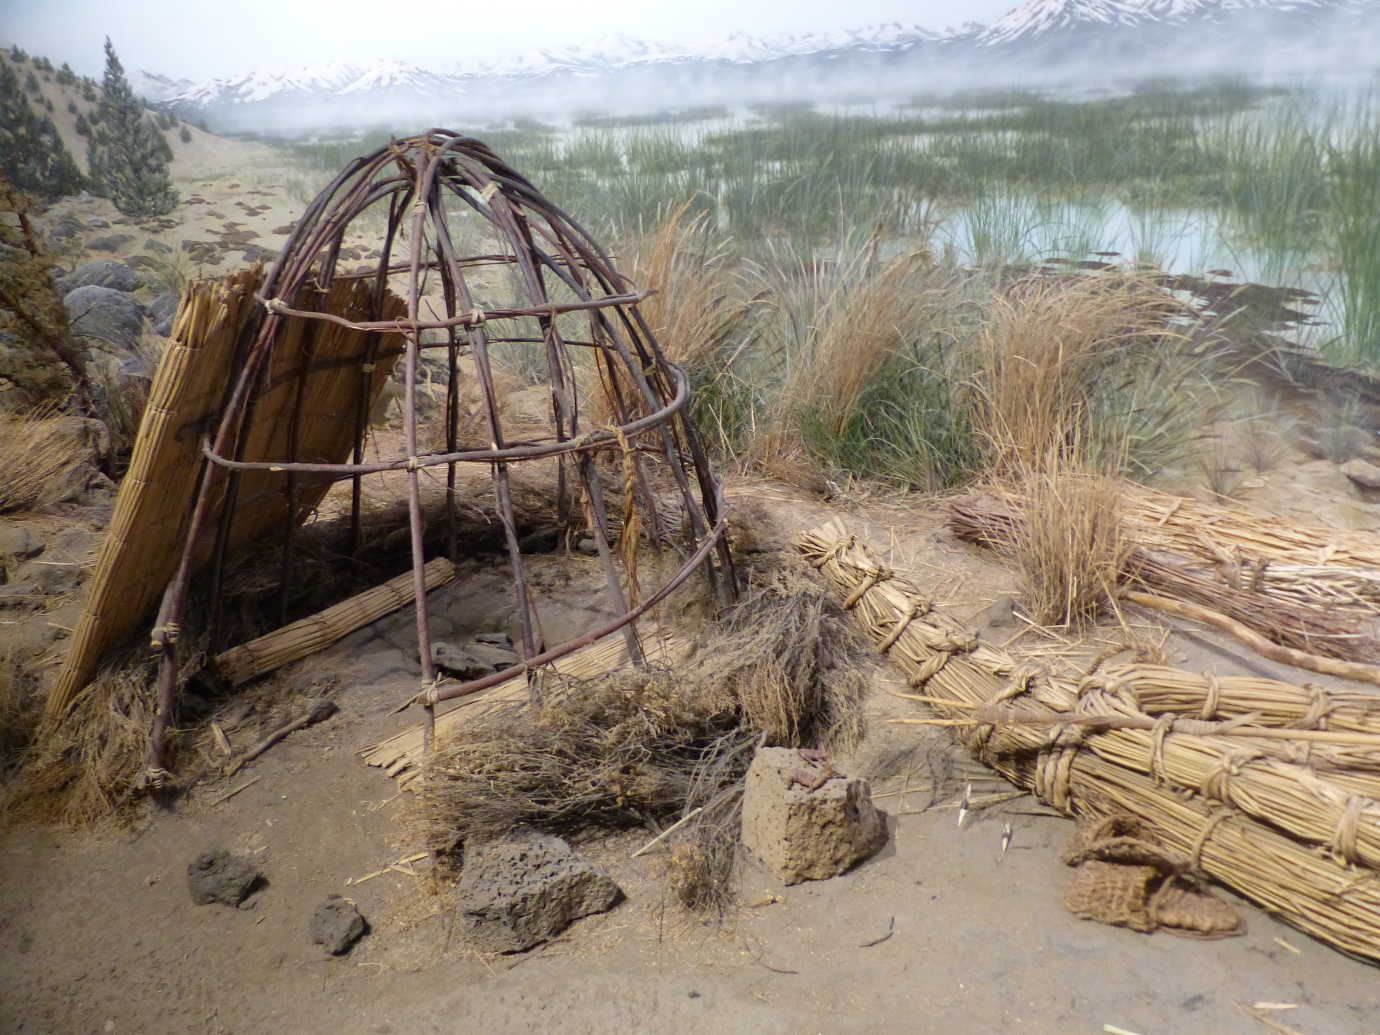 The High Desert Museum’s *Spirit of the West* exhibition begins with a Northern Paiute scene from Nevada—carefully embedded in the scene is the use of tule (a native reed) in the scene’s wickiup, cultural objects, and tule reed watercraft. Image courtesy of the High Desert Museum.